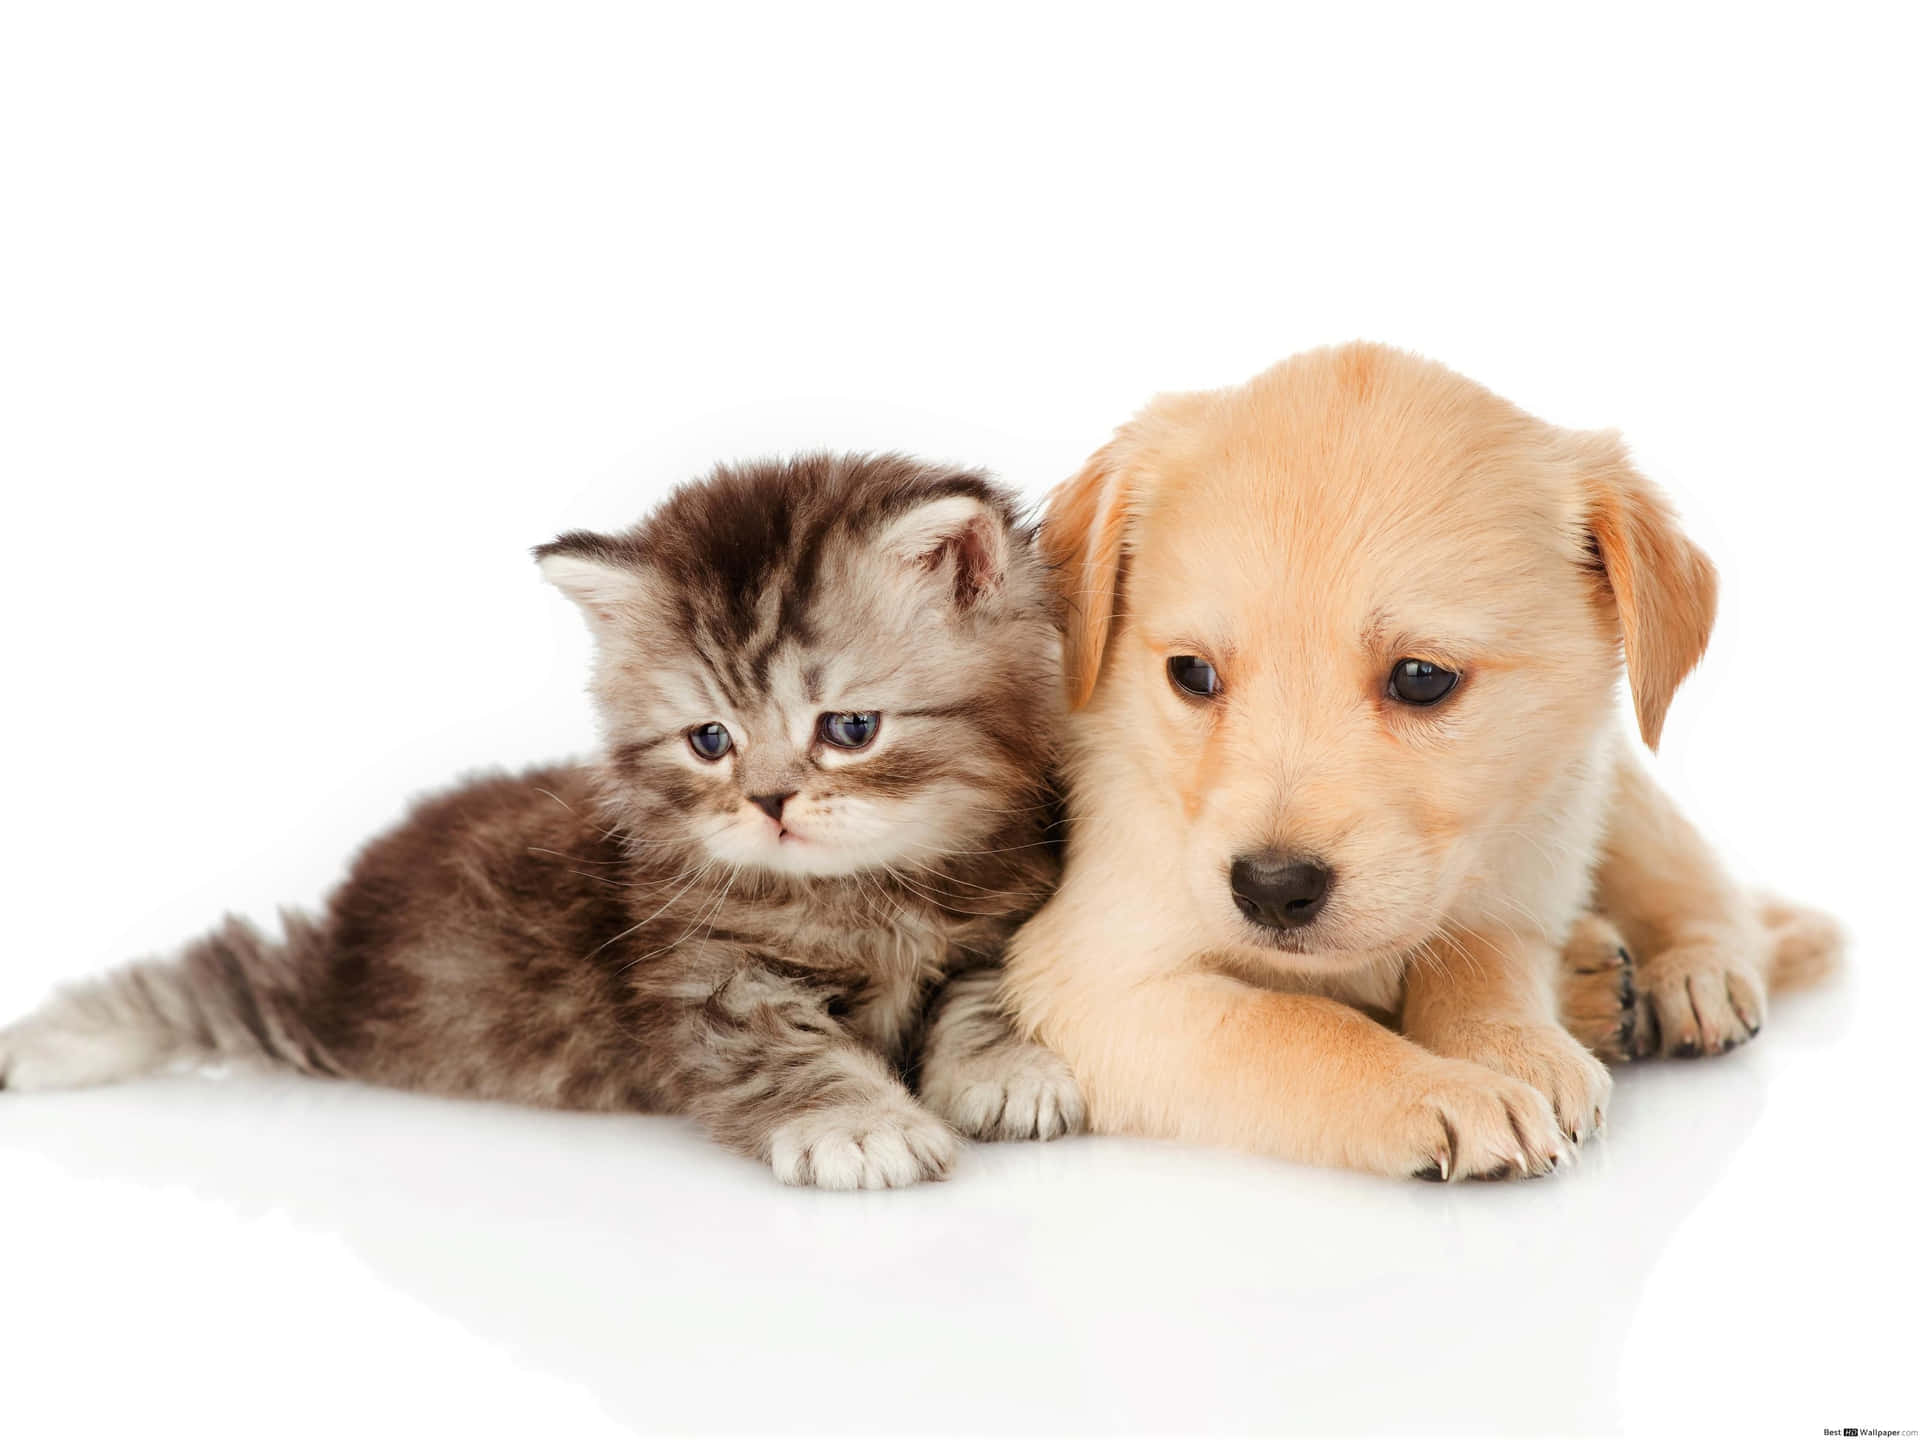 A Puppy And Kitten Sitting Together On A White Background Wallpaper